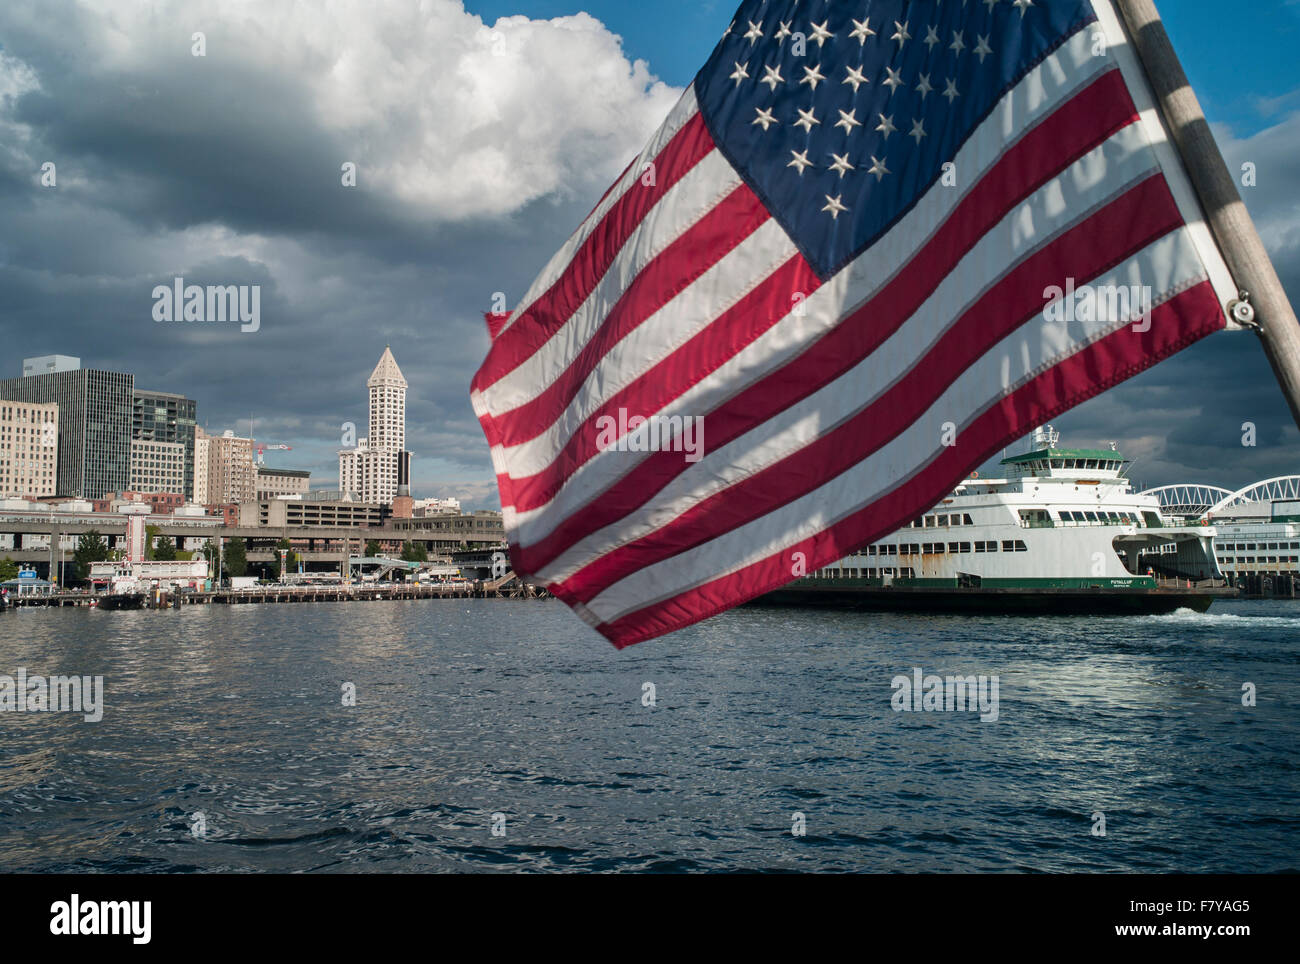 United States, Washington, Seattle, Flag of the United States on the stern of a boat leaving the waterfront with a ferryboat Stock Photo